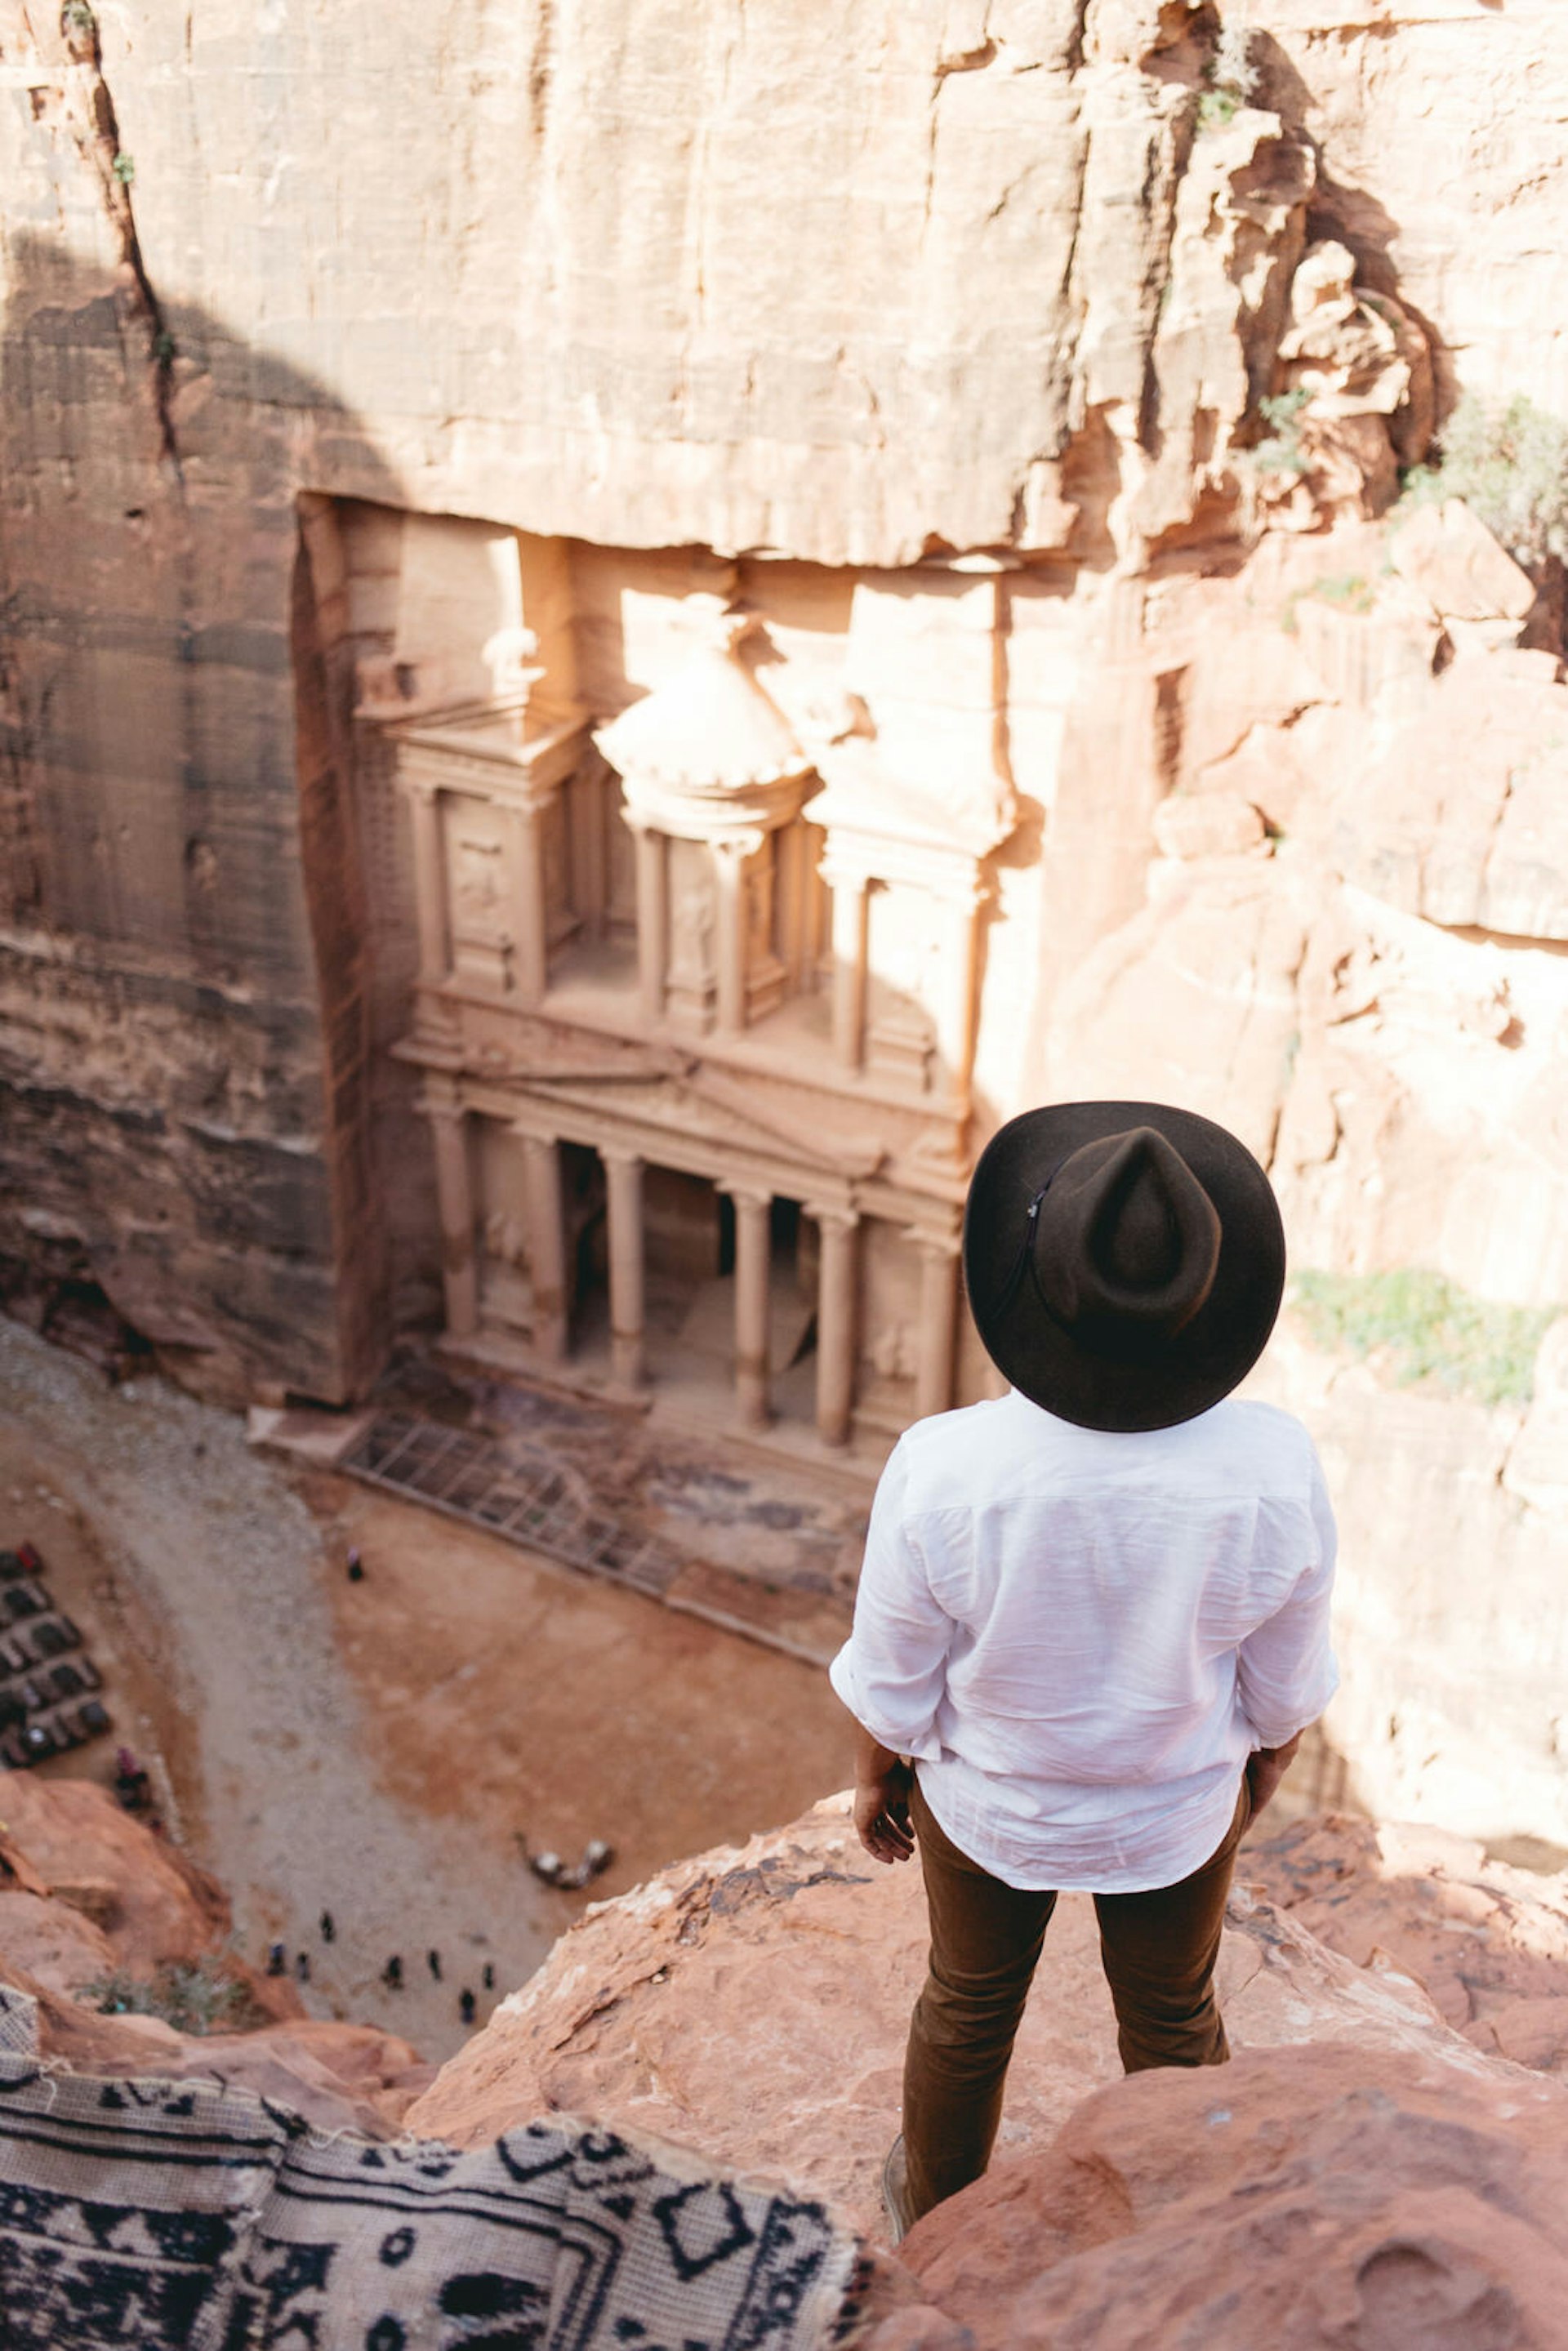 Hiker standing at one of Petra's high places in front of the Treasury, Jordan. Image by Jin Chu Ferrer / Getty Images